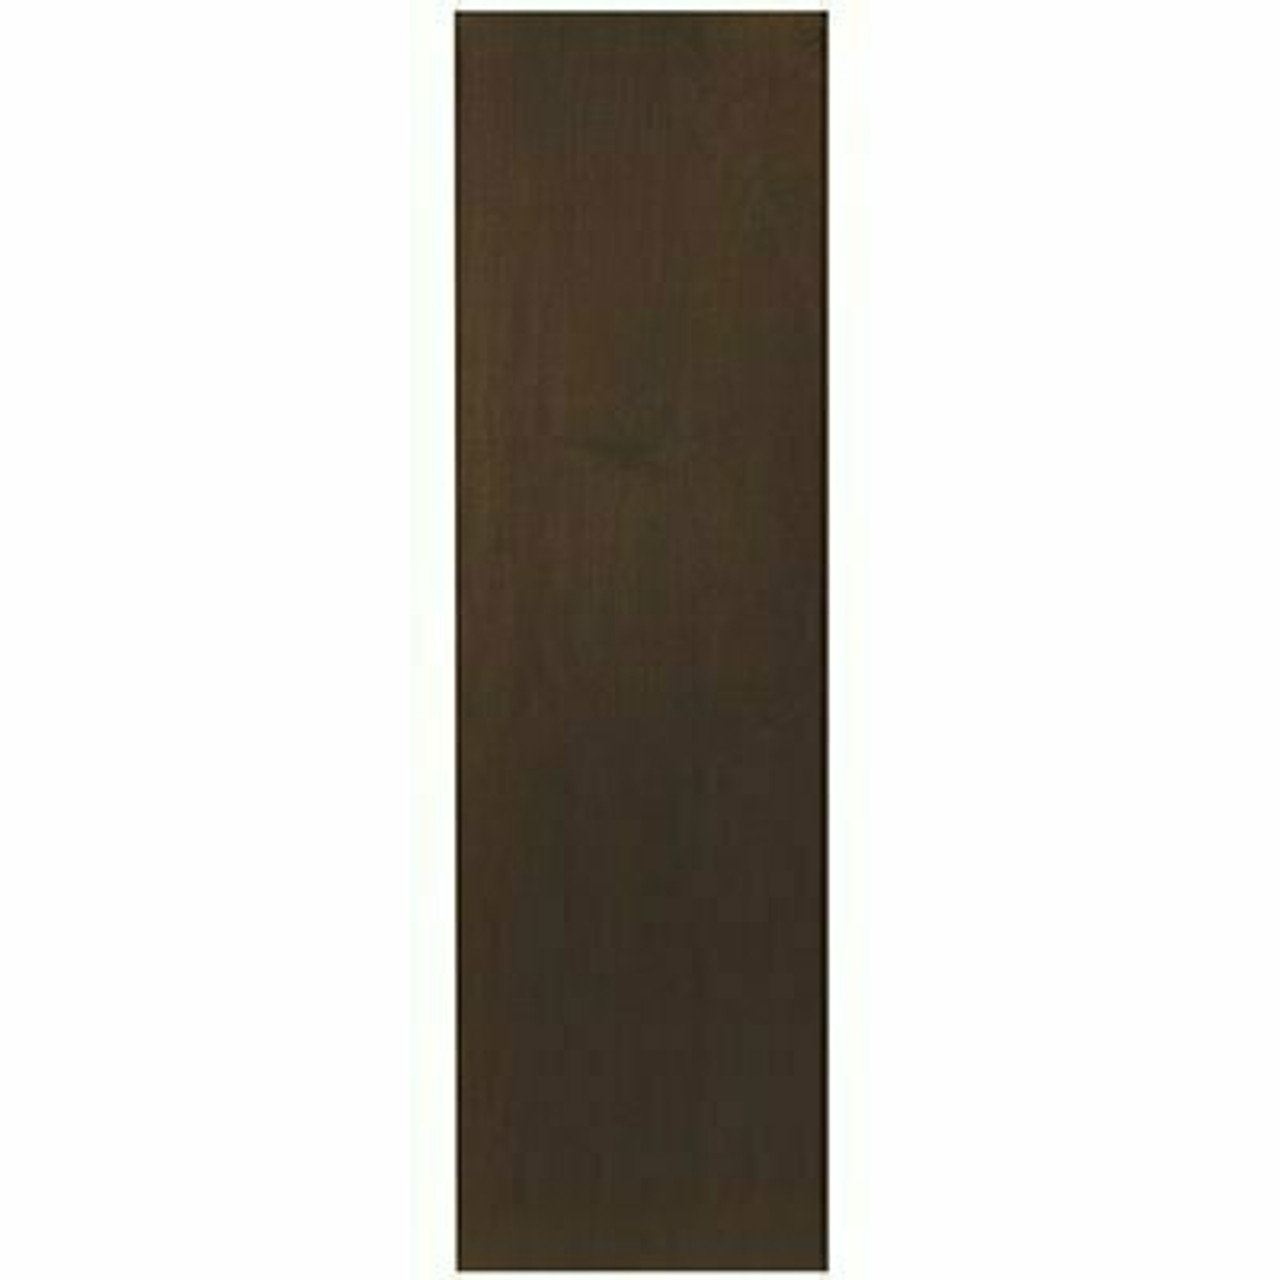 Hampton Bay 0.1875X36X11.25 in. Cabinet End Panel In Java (2-Pack)